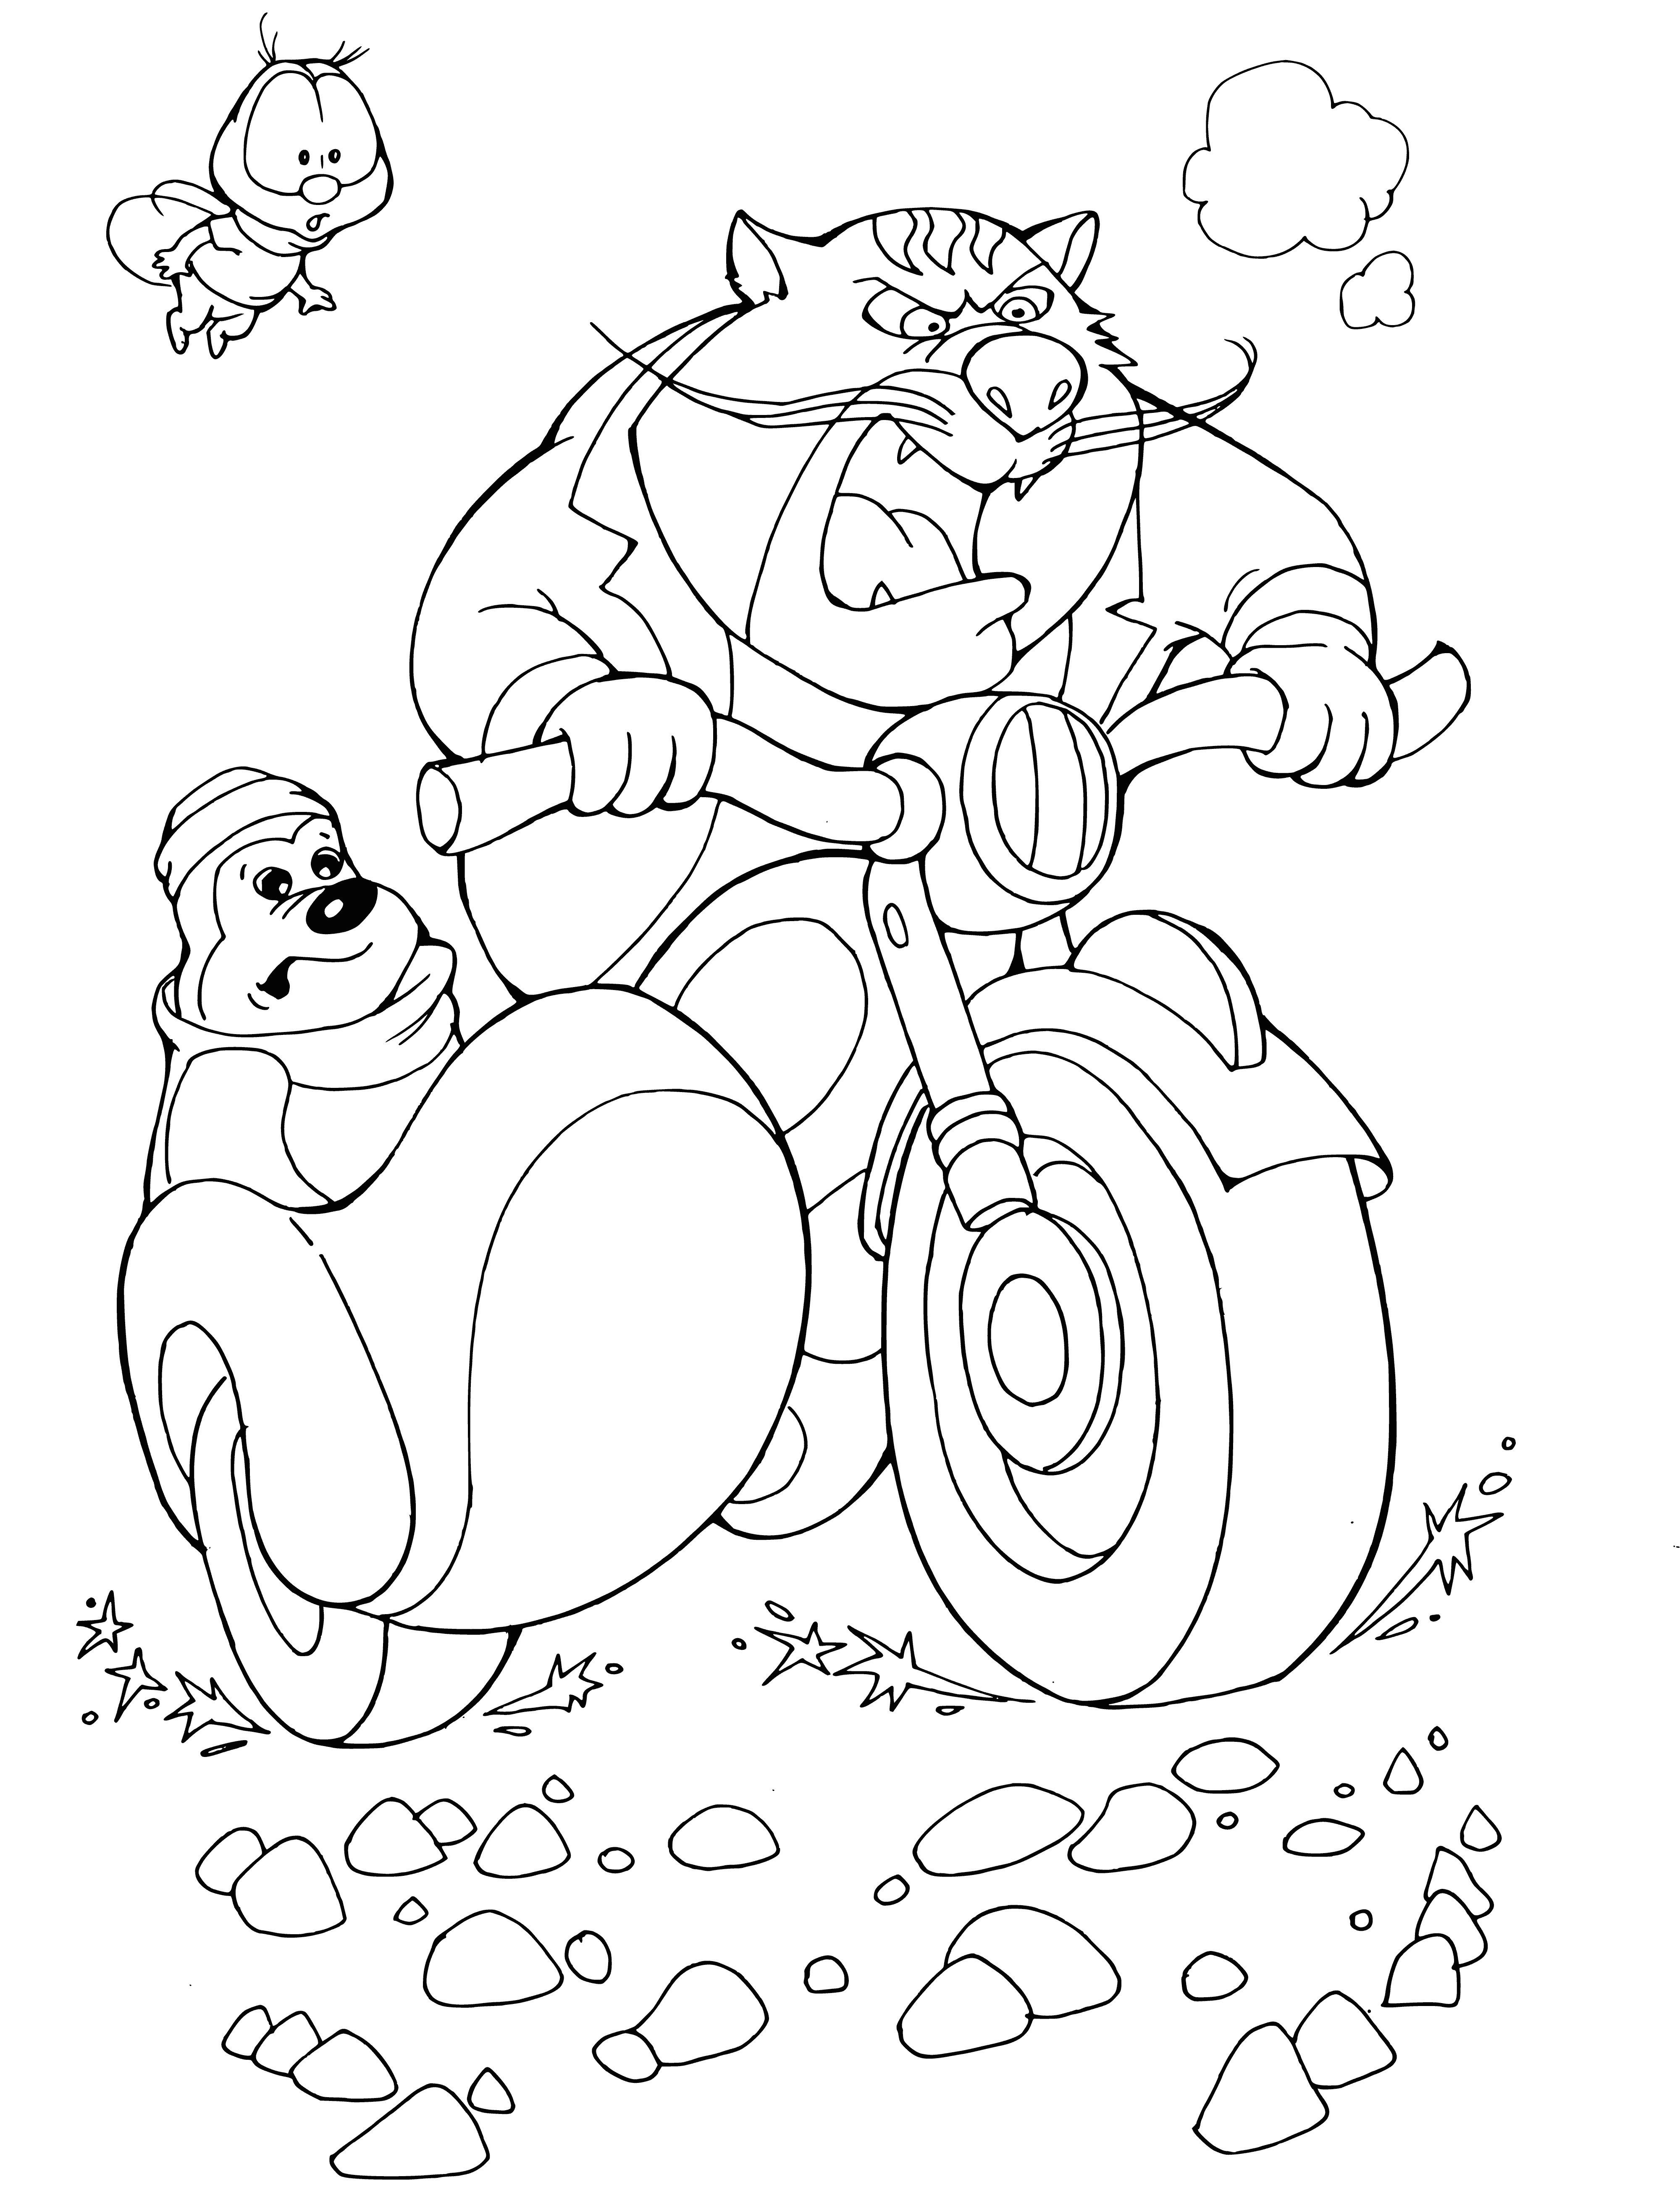 coloring page: Chip & Dale ride a motorcycle with Fat Cat, speeding & having a blast!